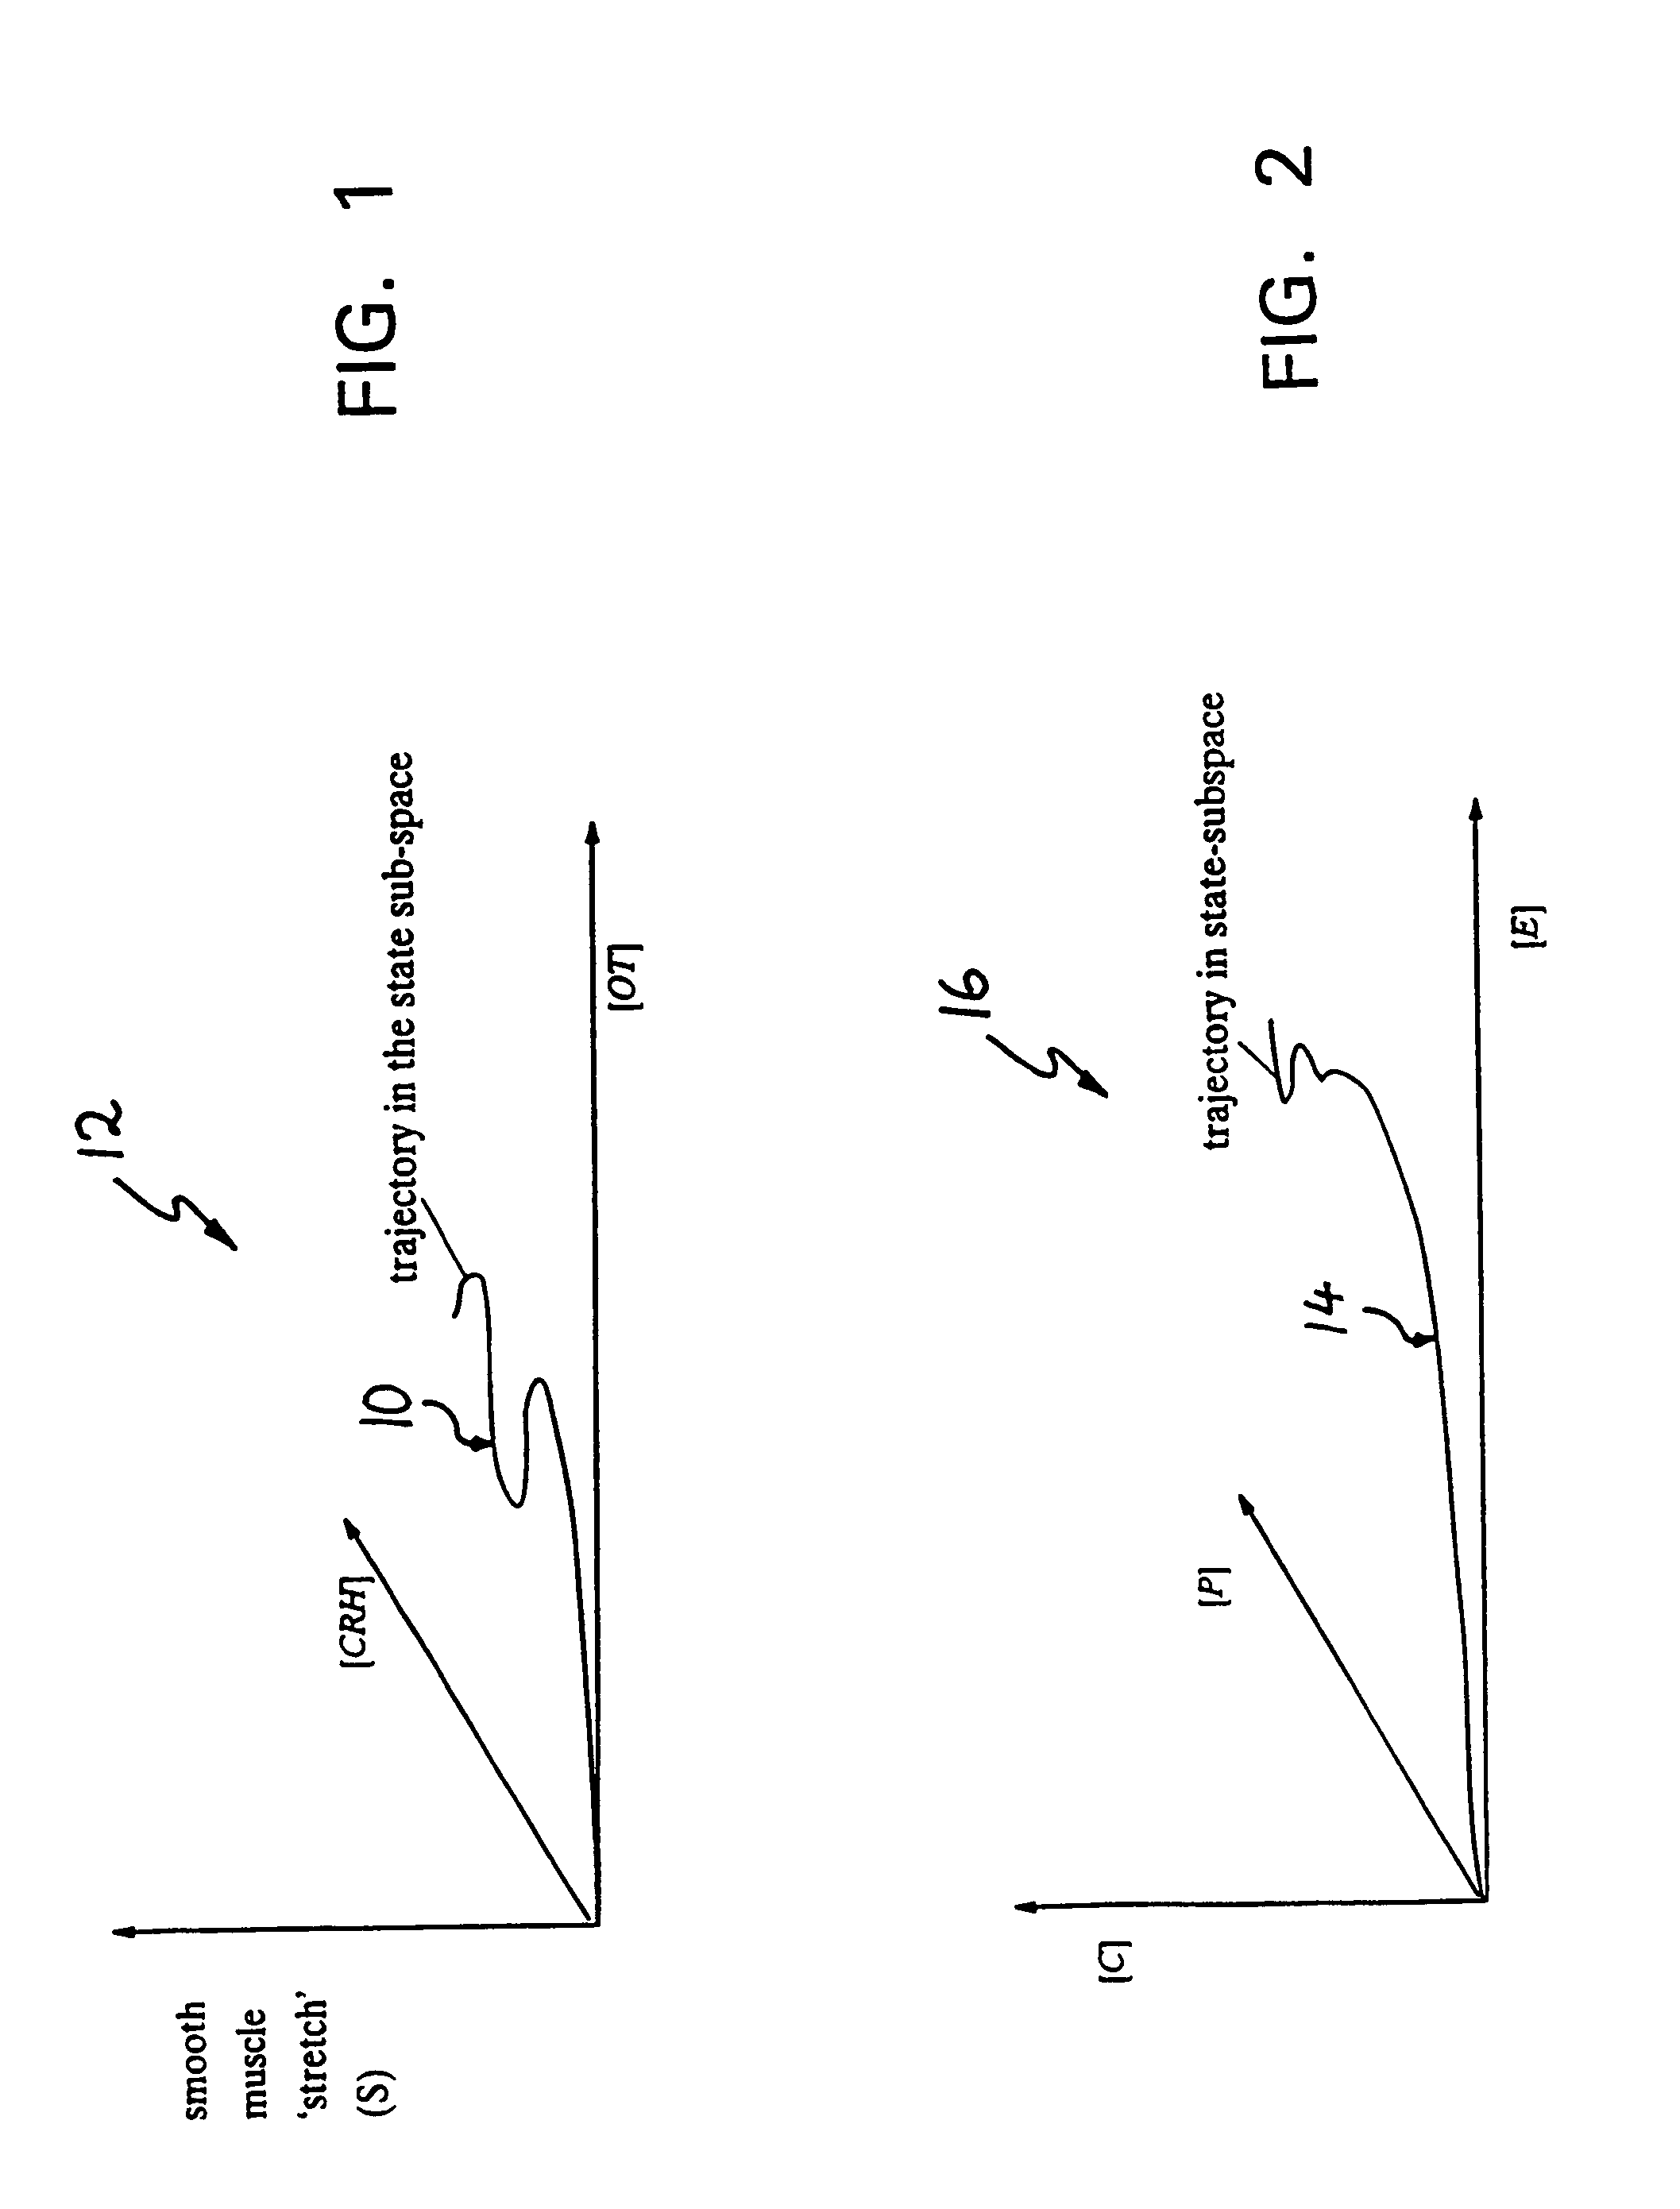 Method for analysis of biological systems